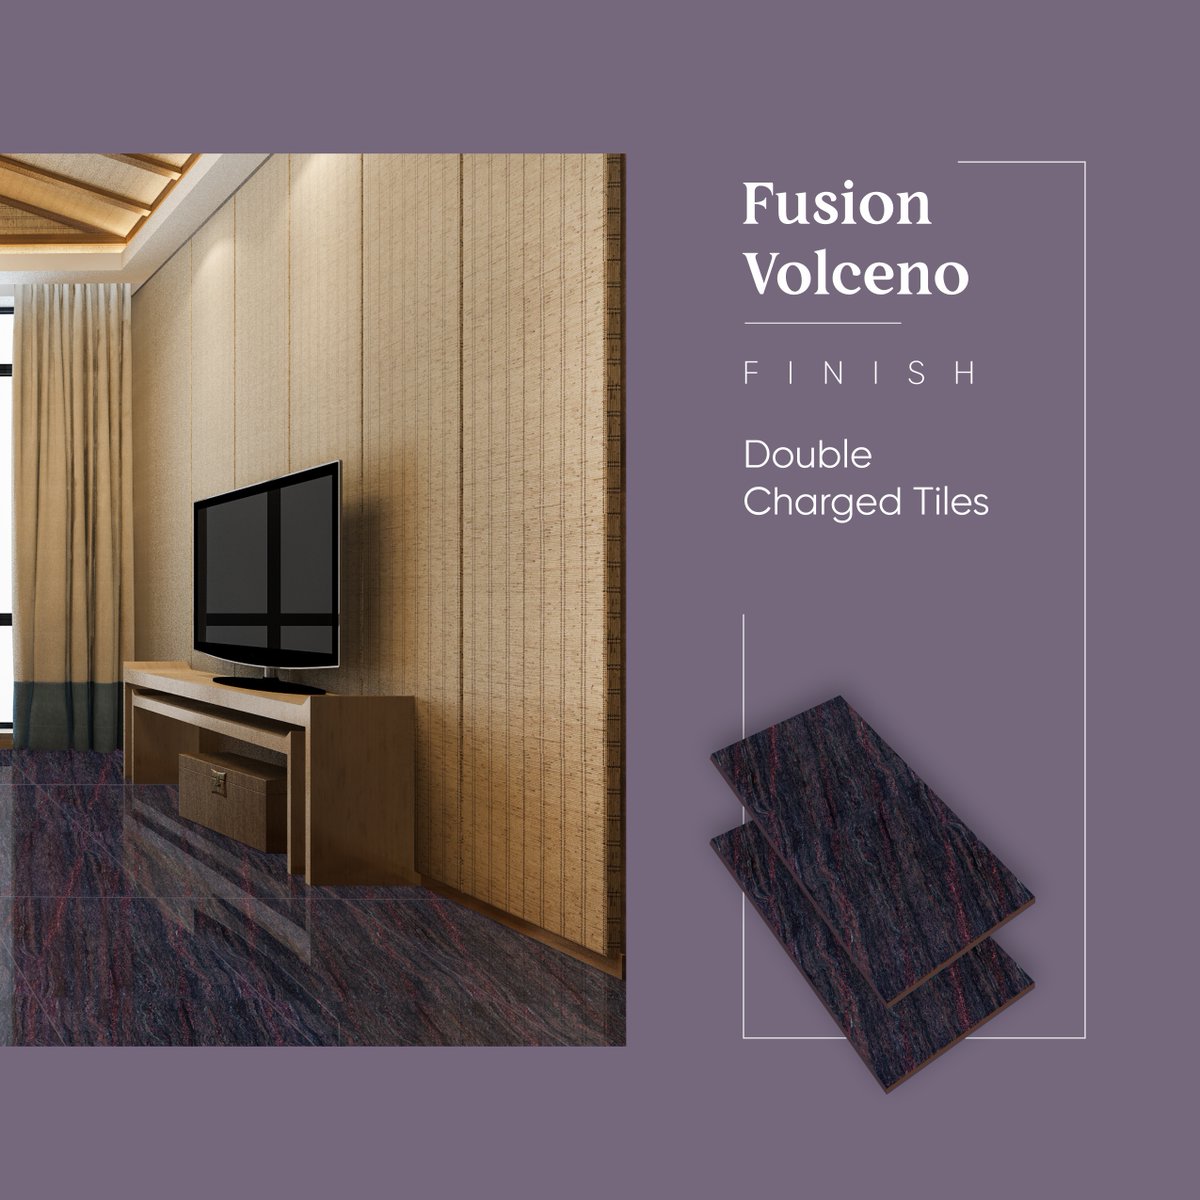 Ignite your space with the fiery beauty of Fusion Volceno double charged vitrified tiles, sized at 600 x 1200 MM. Its dynamic pattern and impeccable quality will transform your floors into a captivating masterpiece.